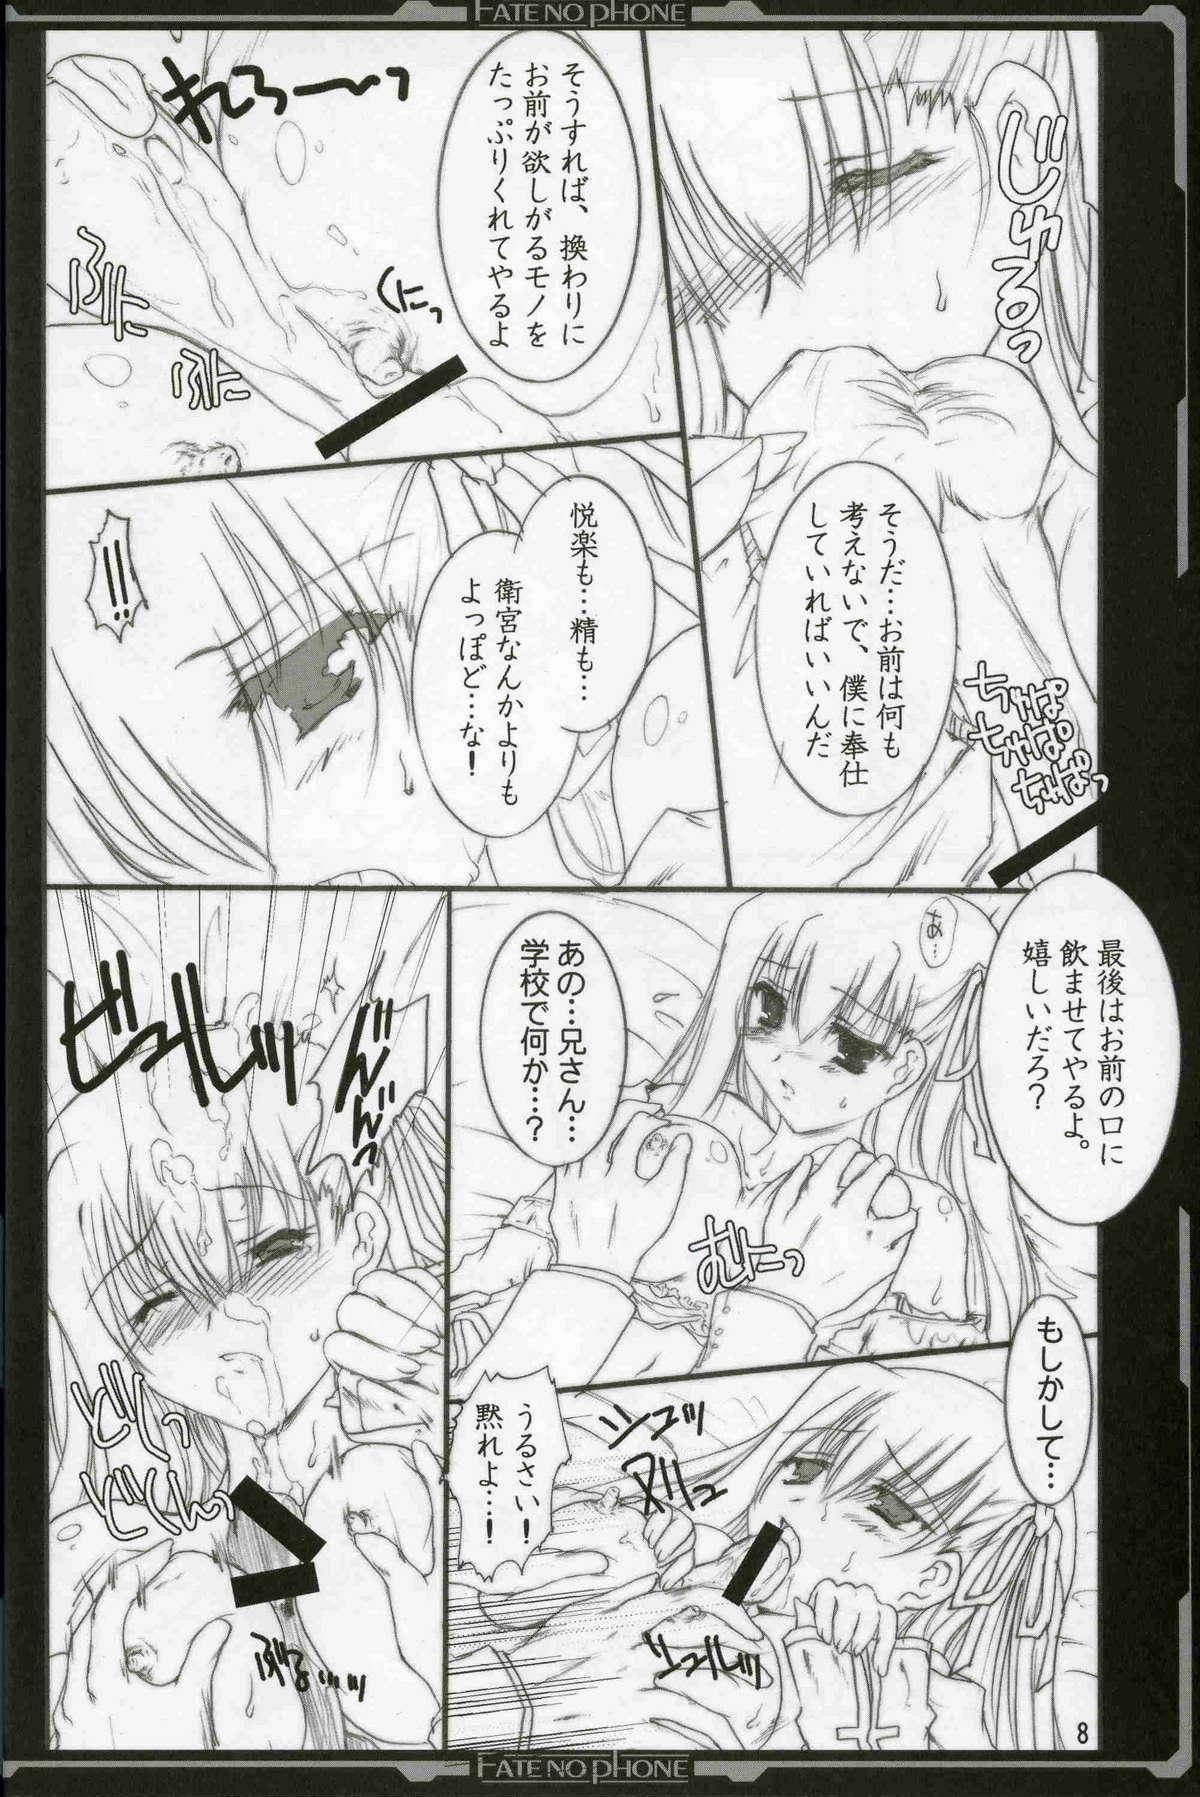 Milk Fate/no phone - Fate stay night Hot Naked Women - Page 7